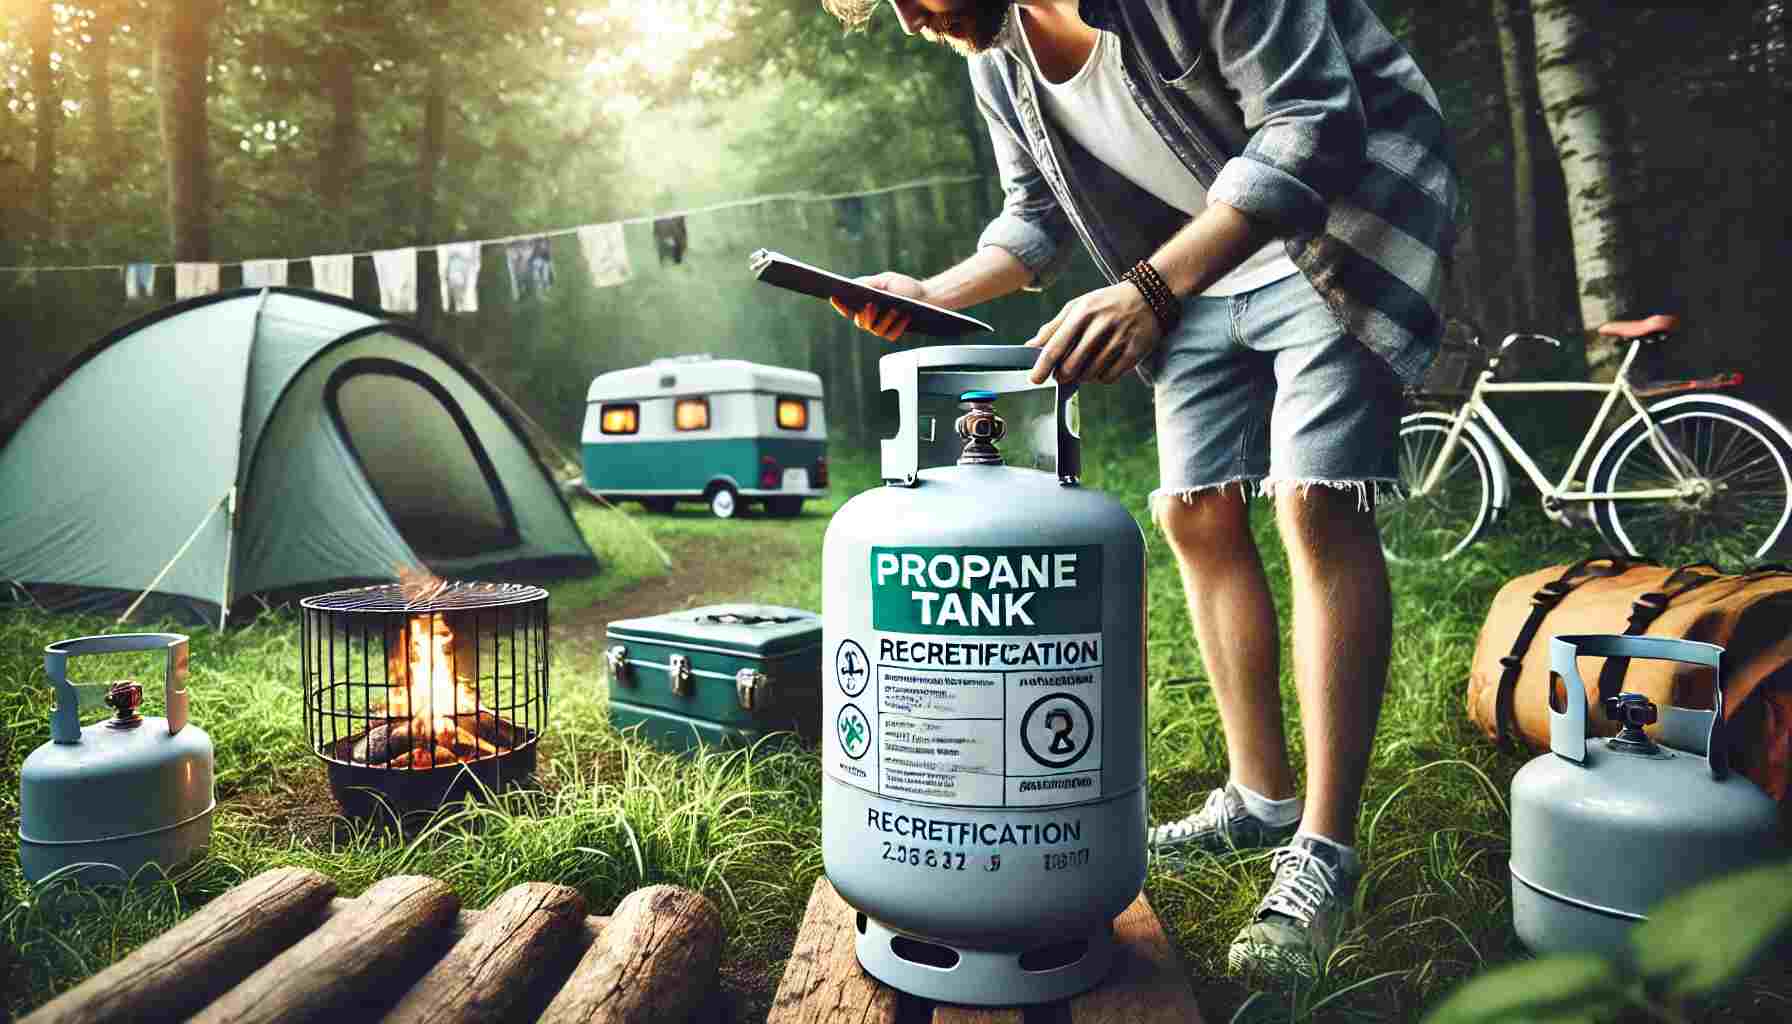 A person inspecting a propane tank outdoors at a camping site with tents and a campfire setup in the background, highlighting safety and responsible propane tank usage.